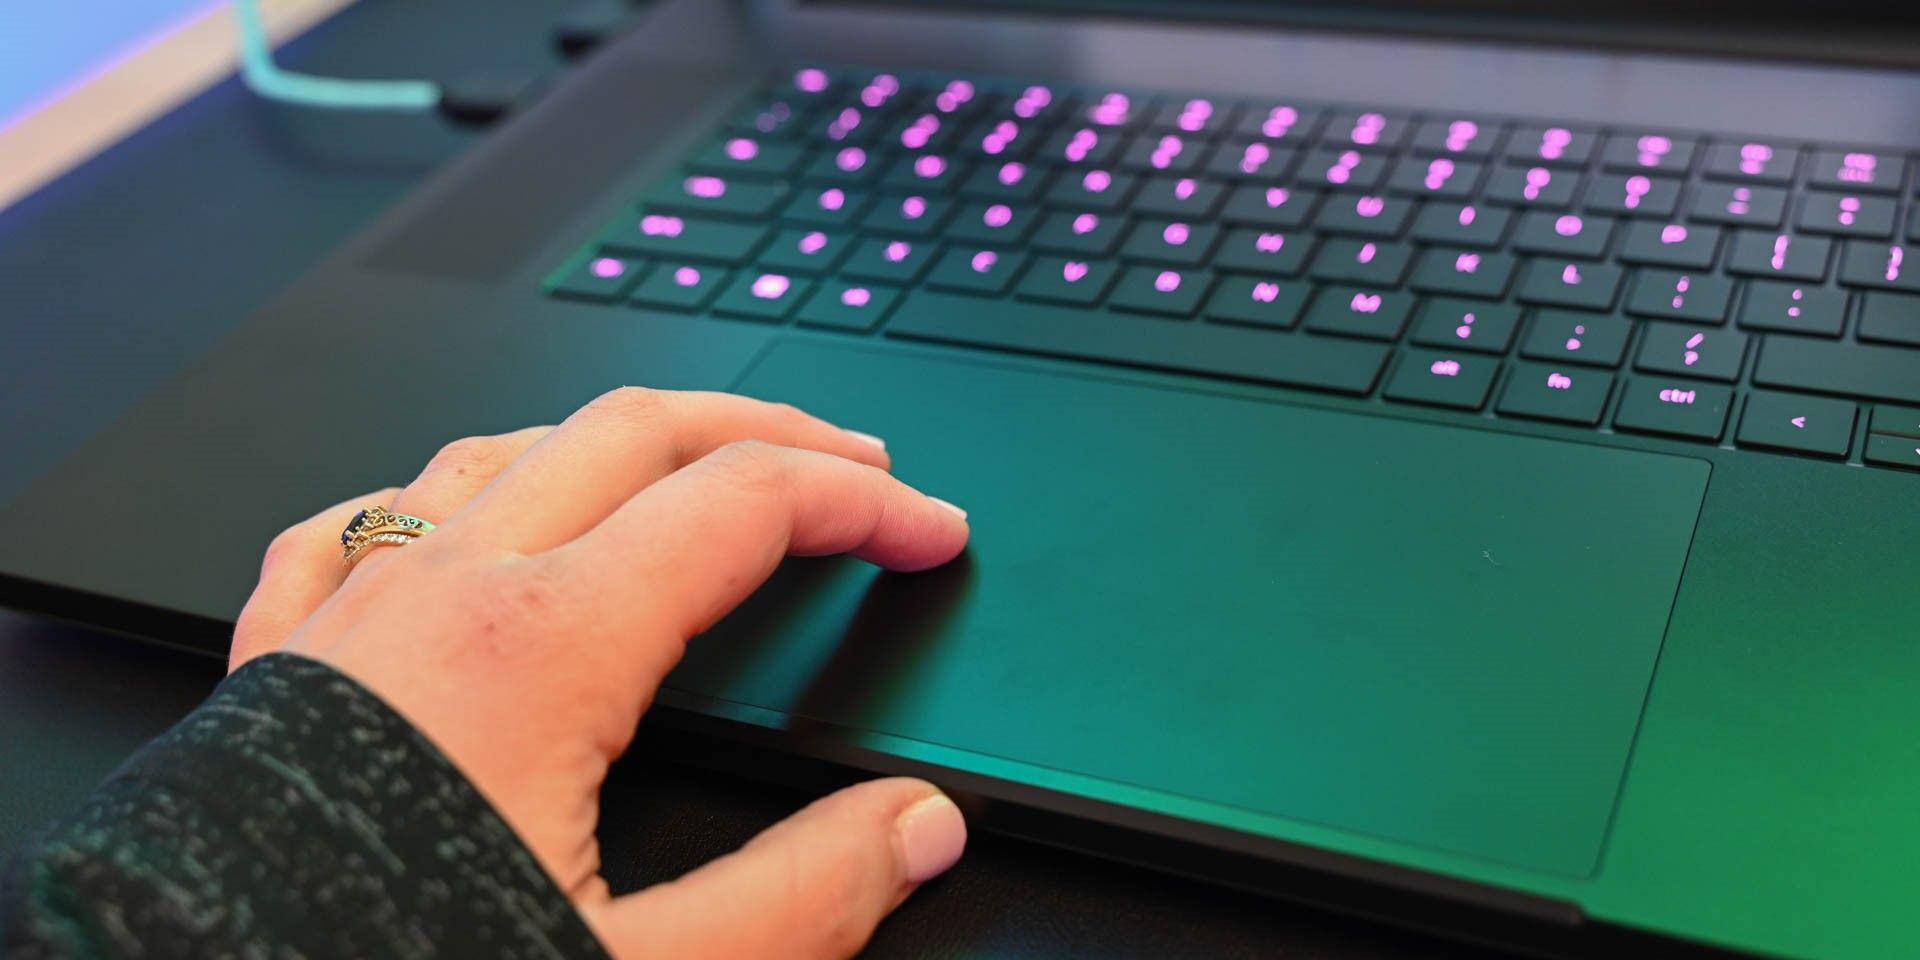 Person using a trackpad on a laptop